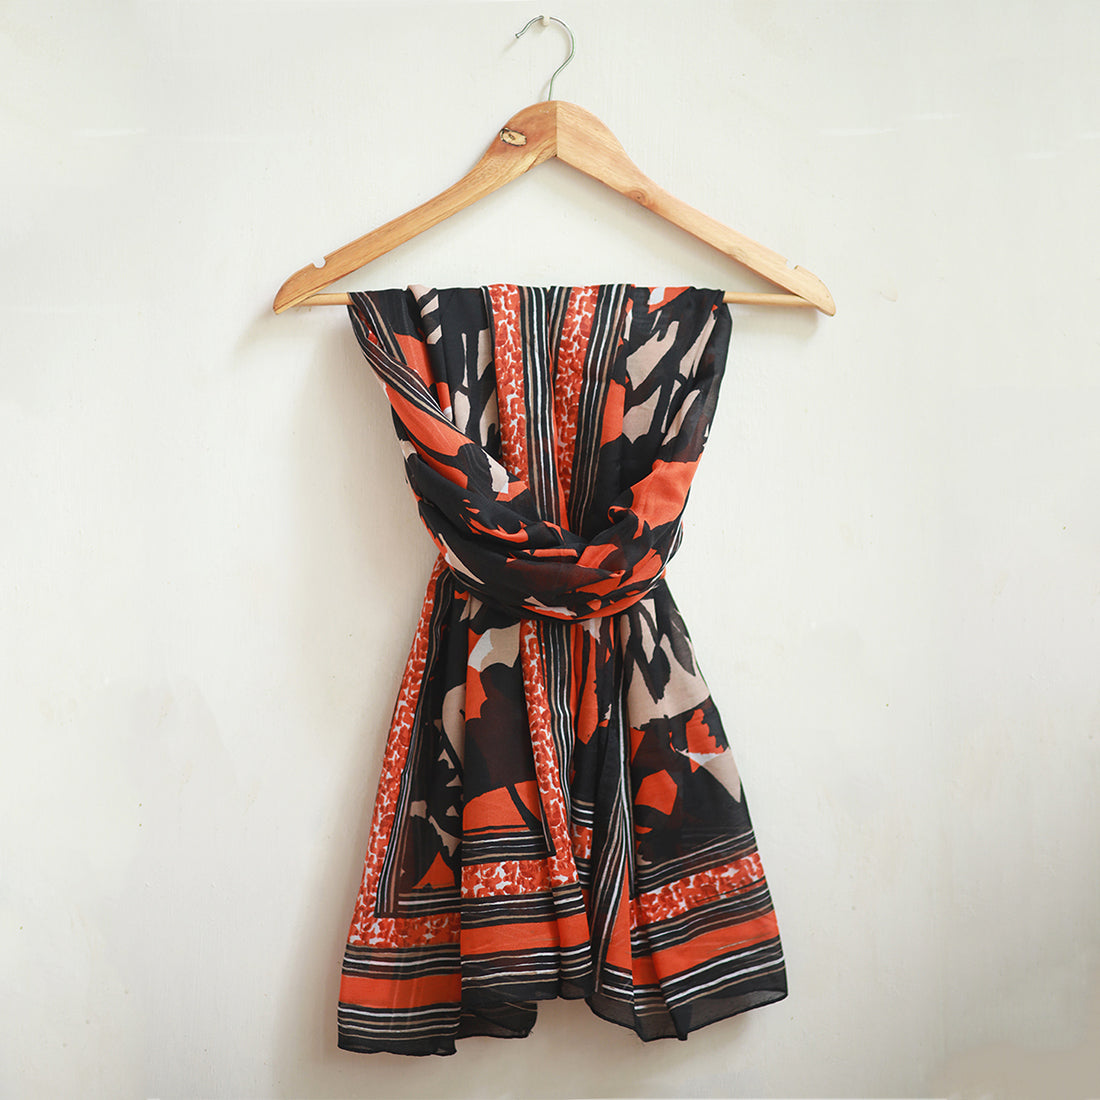 Black, White & Orange Abstract Floral Print with Striped Border Viscose Scarf